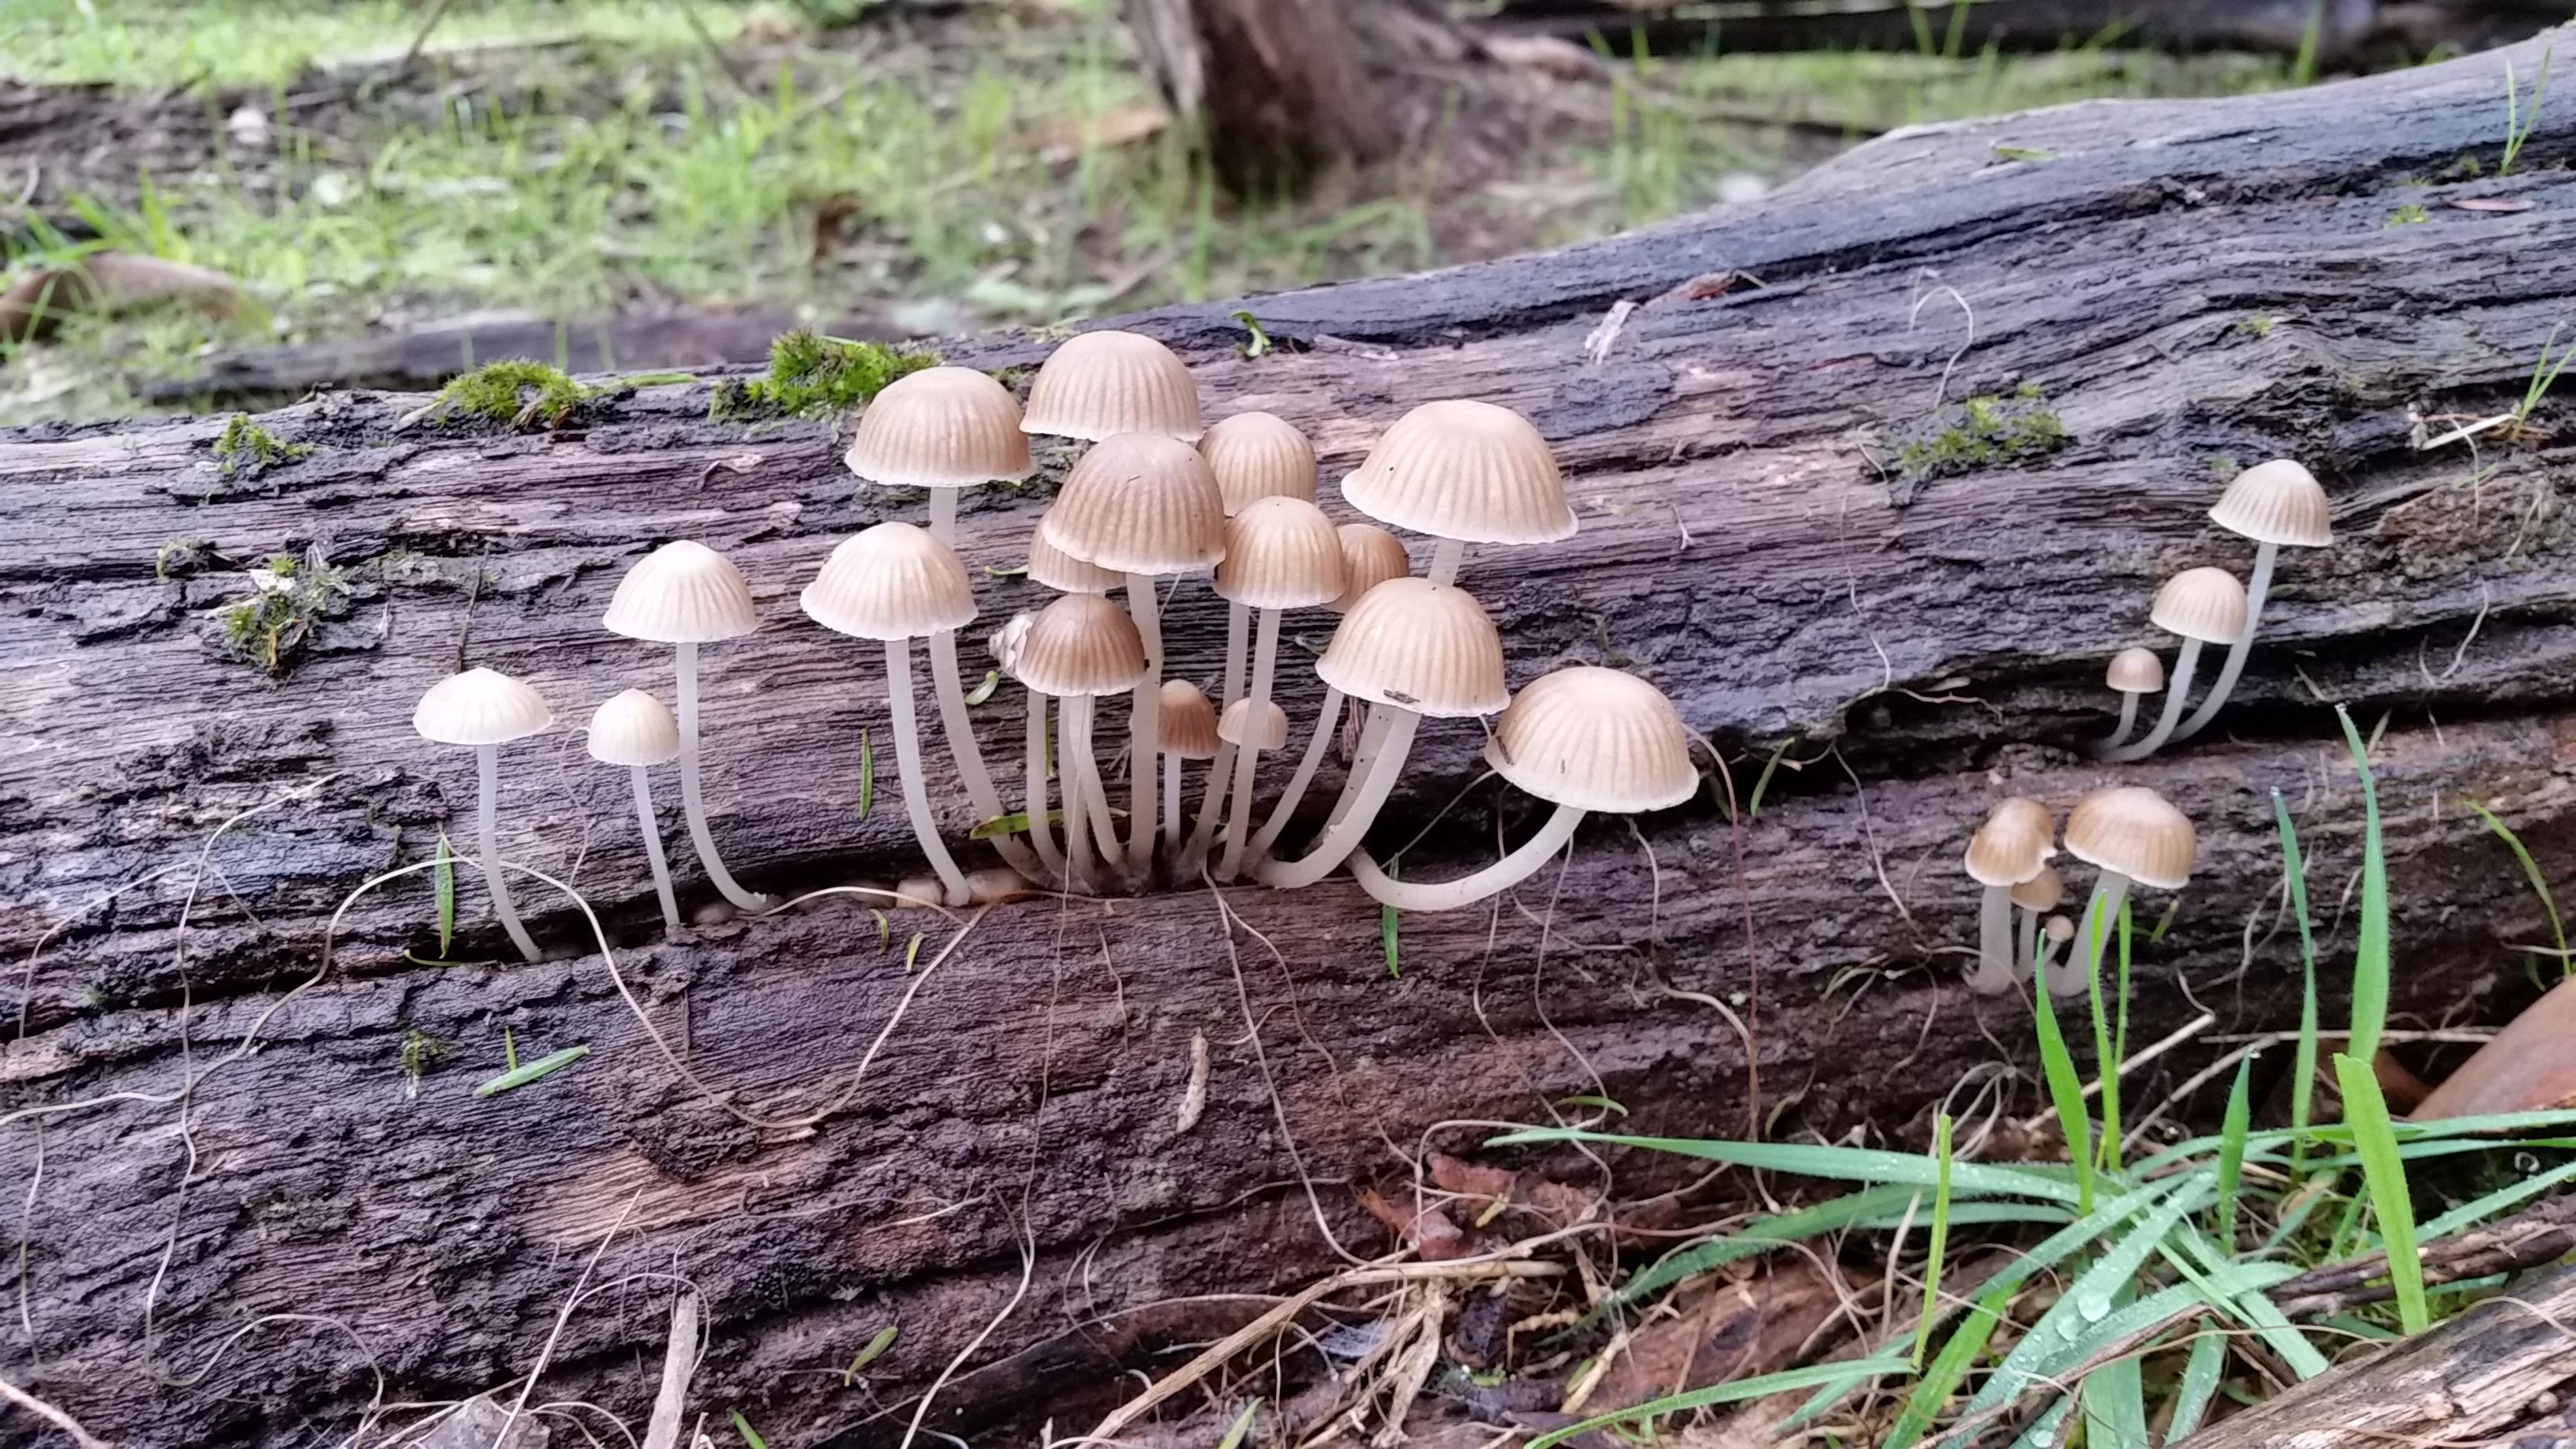 Mushrooms growing out of a damp log